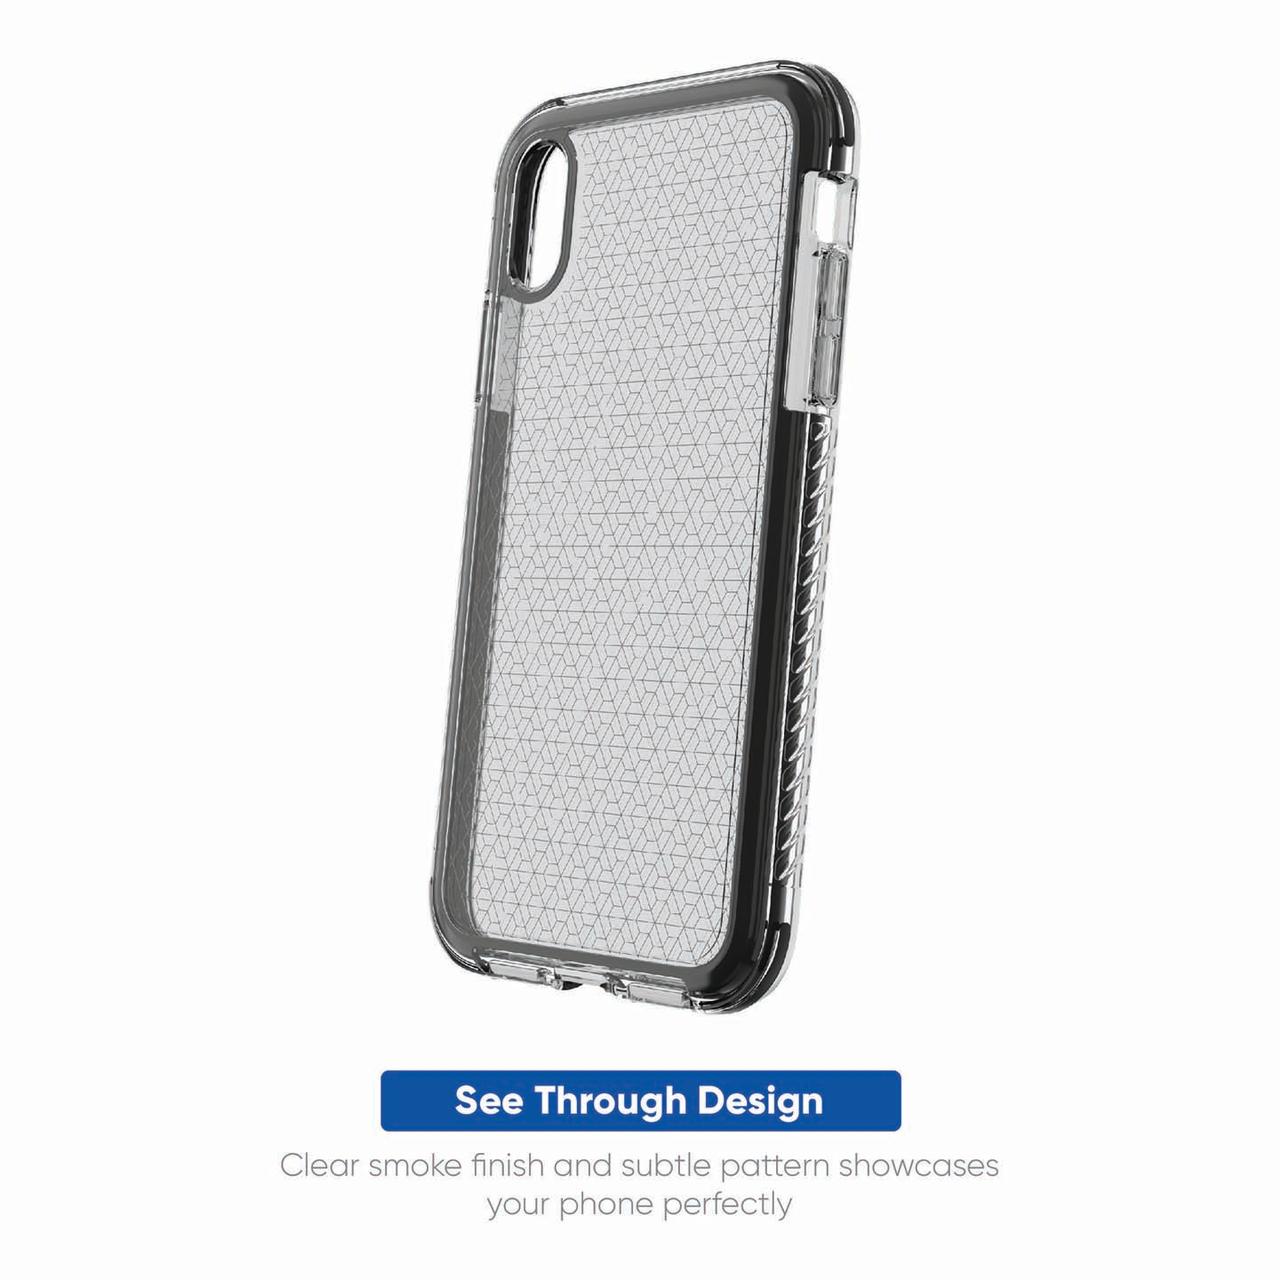 onn. Impact Case with Intellishock Technology for iPhone XR - image 5 of 6